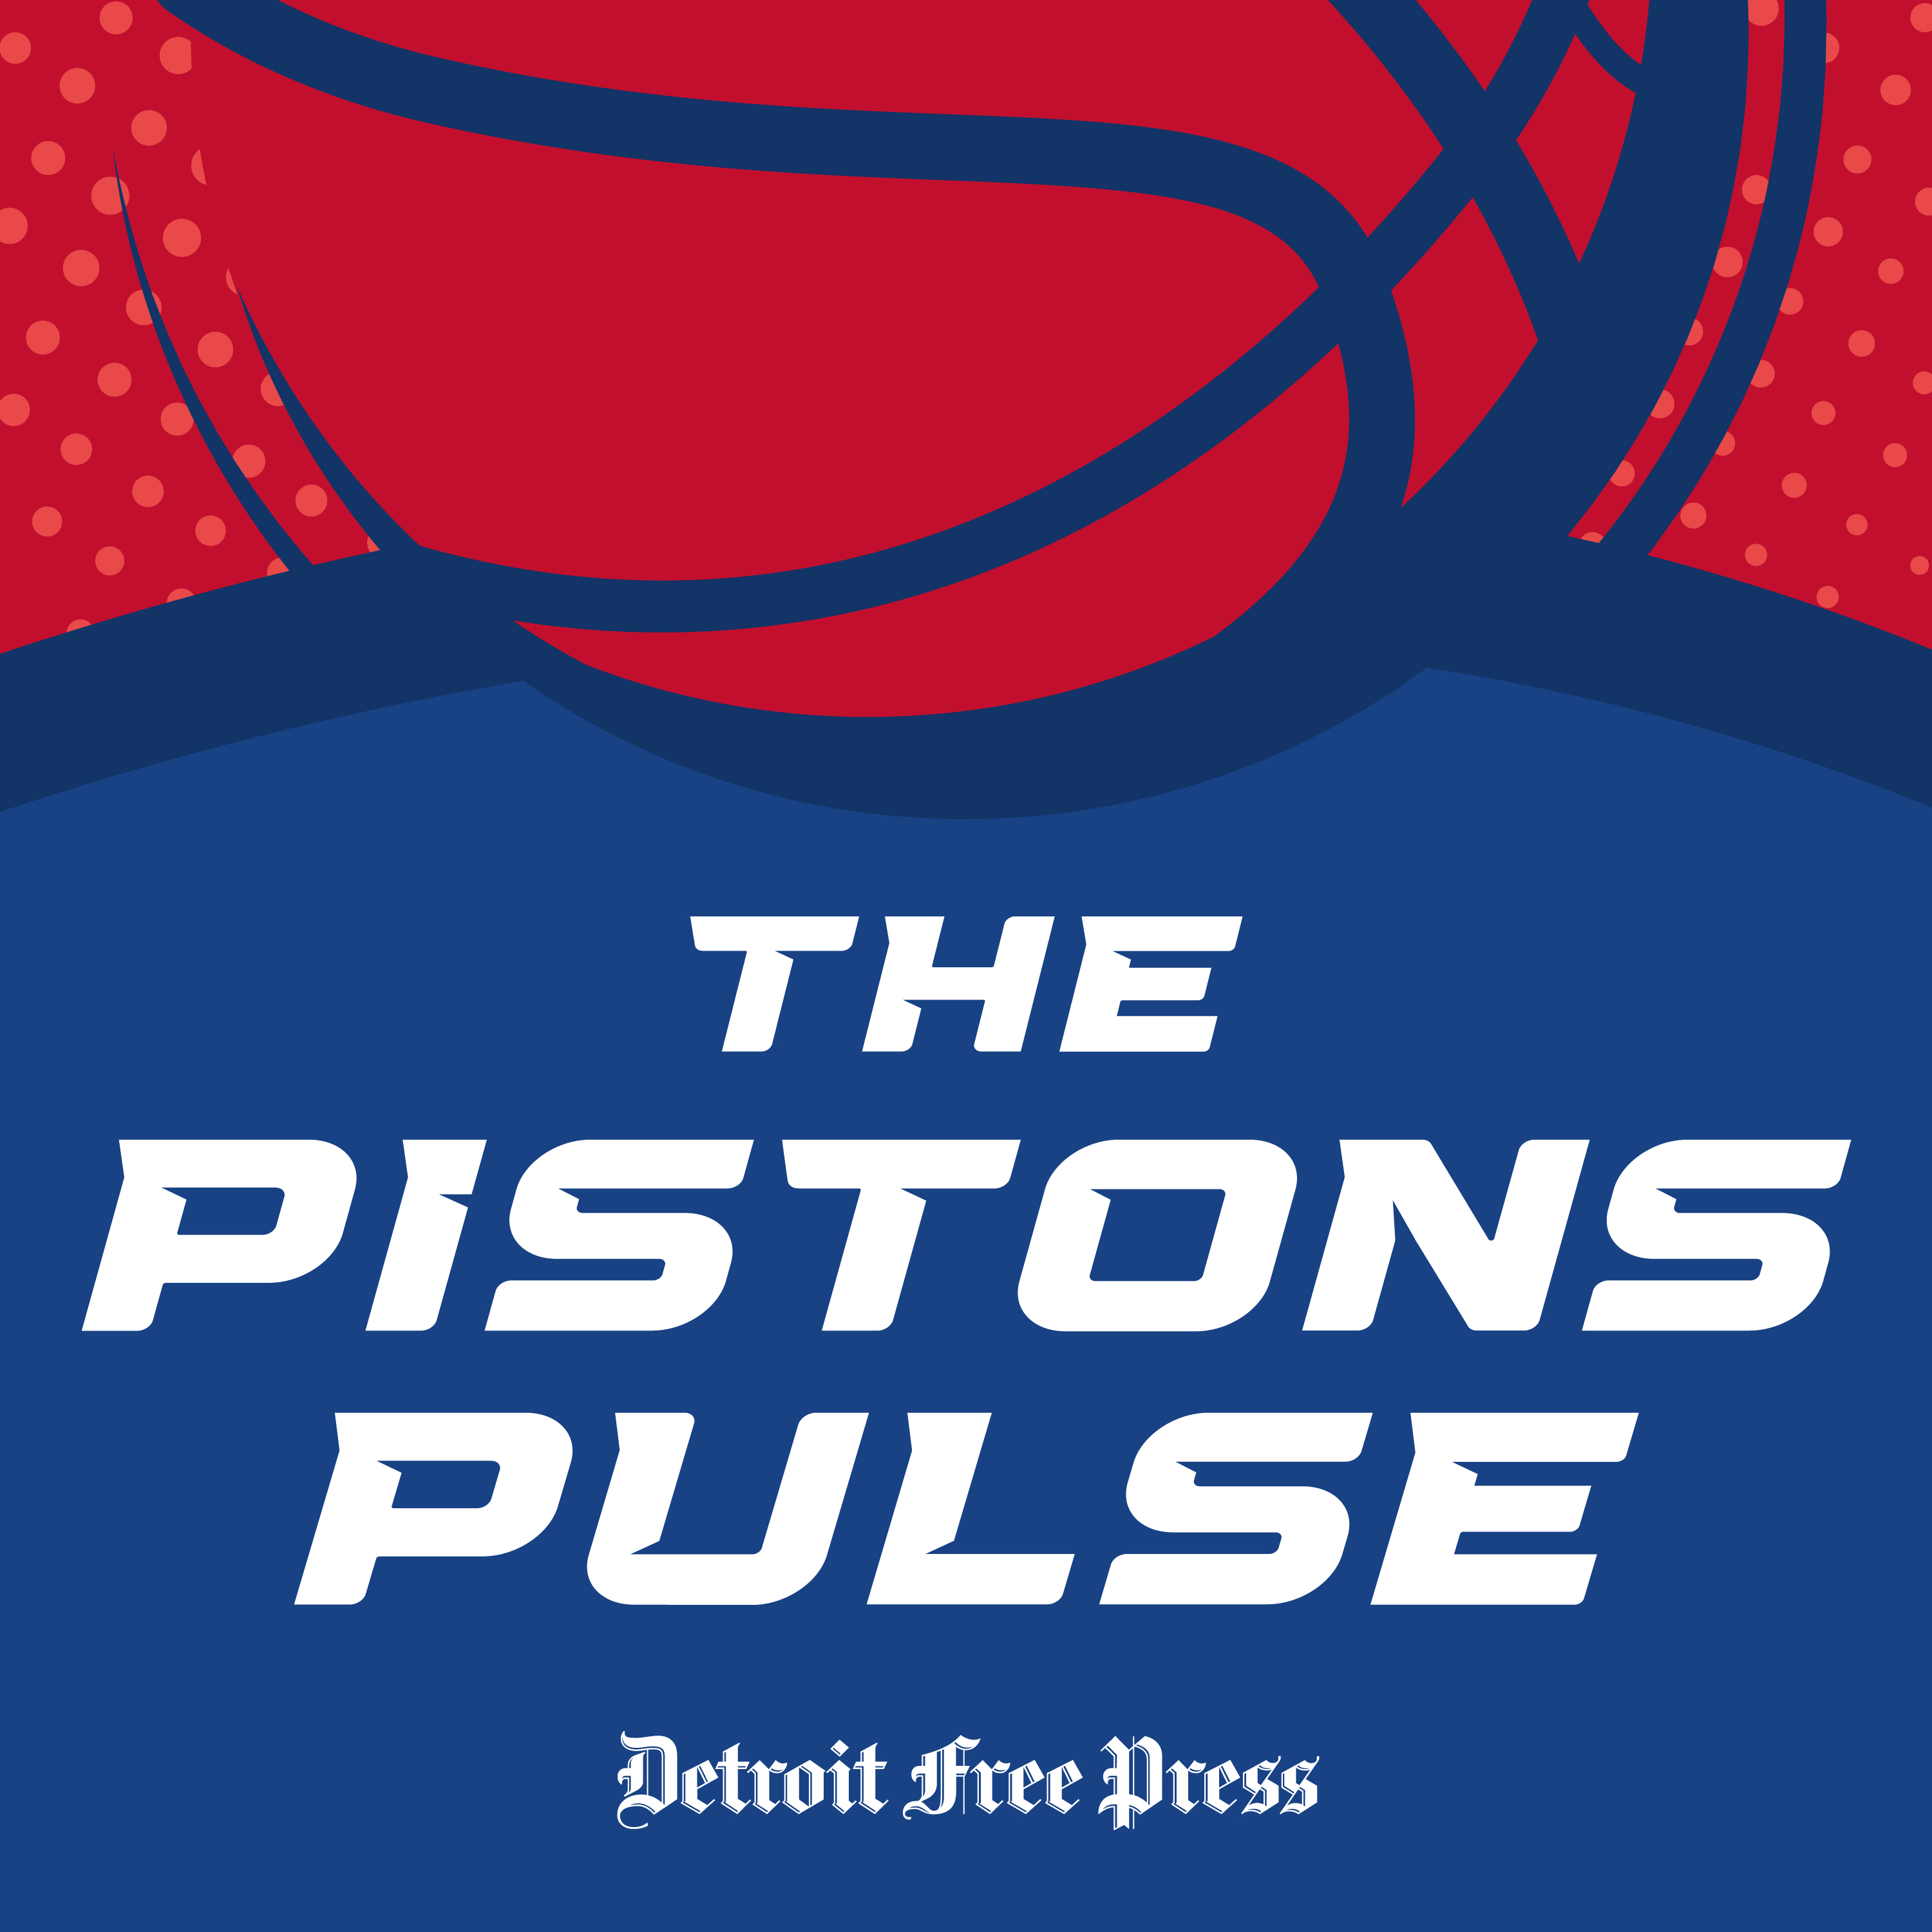 Game Theory Podcast's Sam Vecenie joins to help game out next steps for rebuilding Detroit Pistons